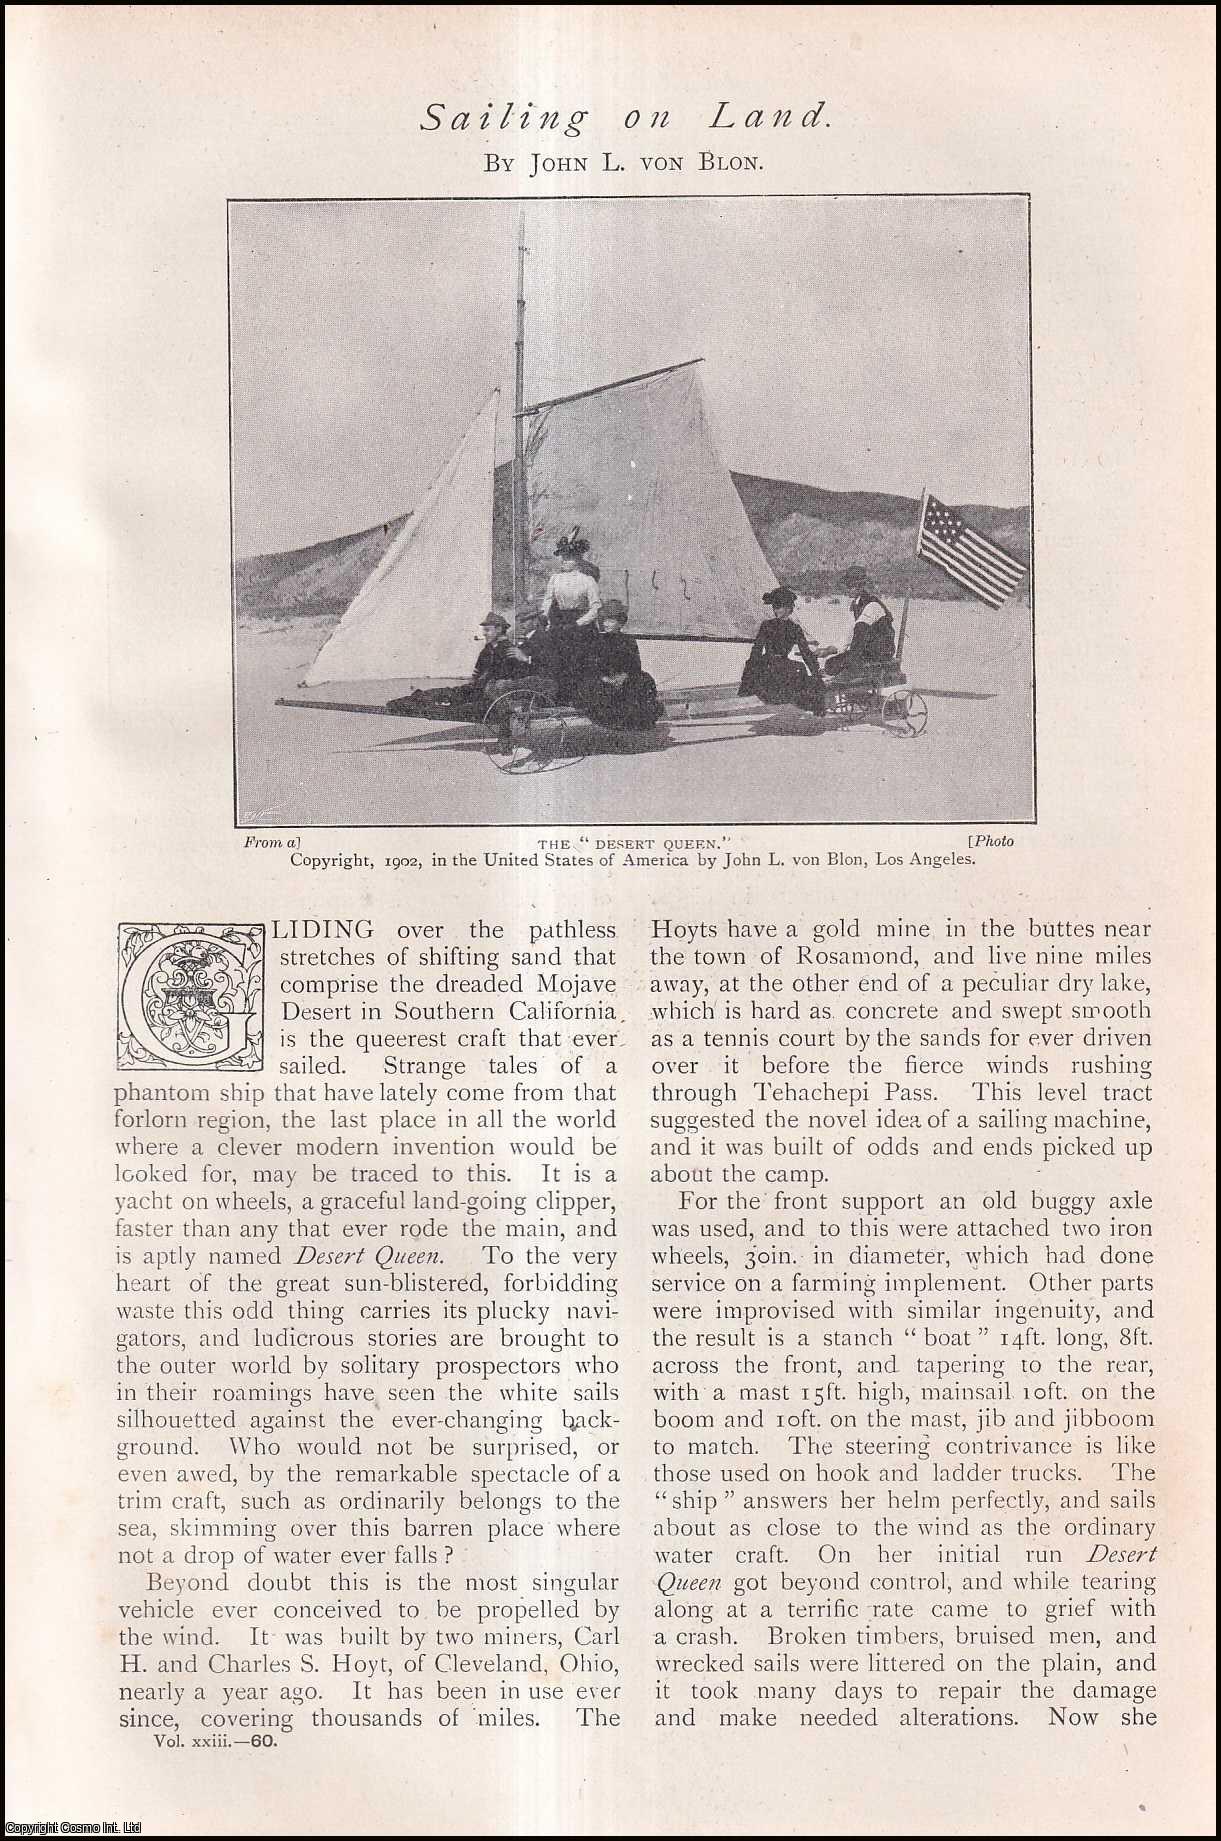 John L. Von Blon - Sailing on Land : land Yacht Racing. The Mojave Sesert, Southern California. An uncommon original article from The Strand Magazine, 1902.